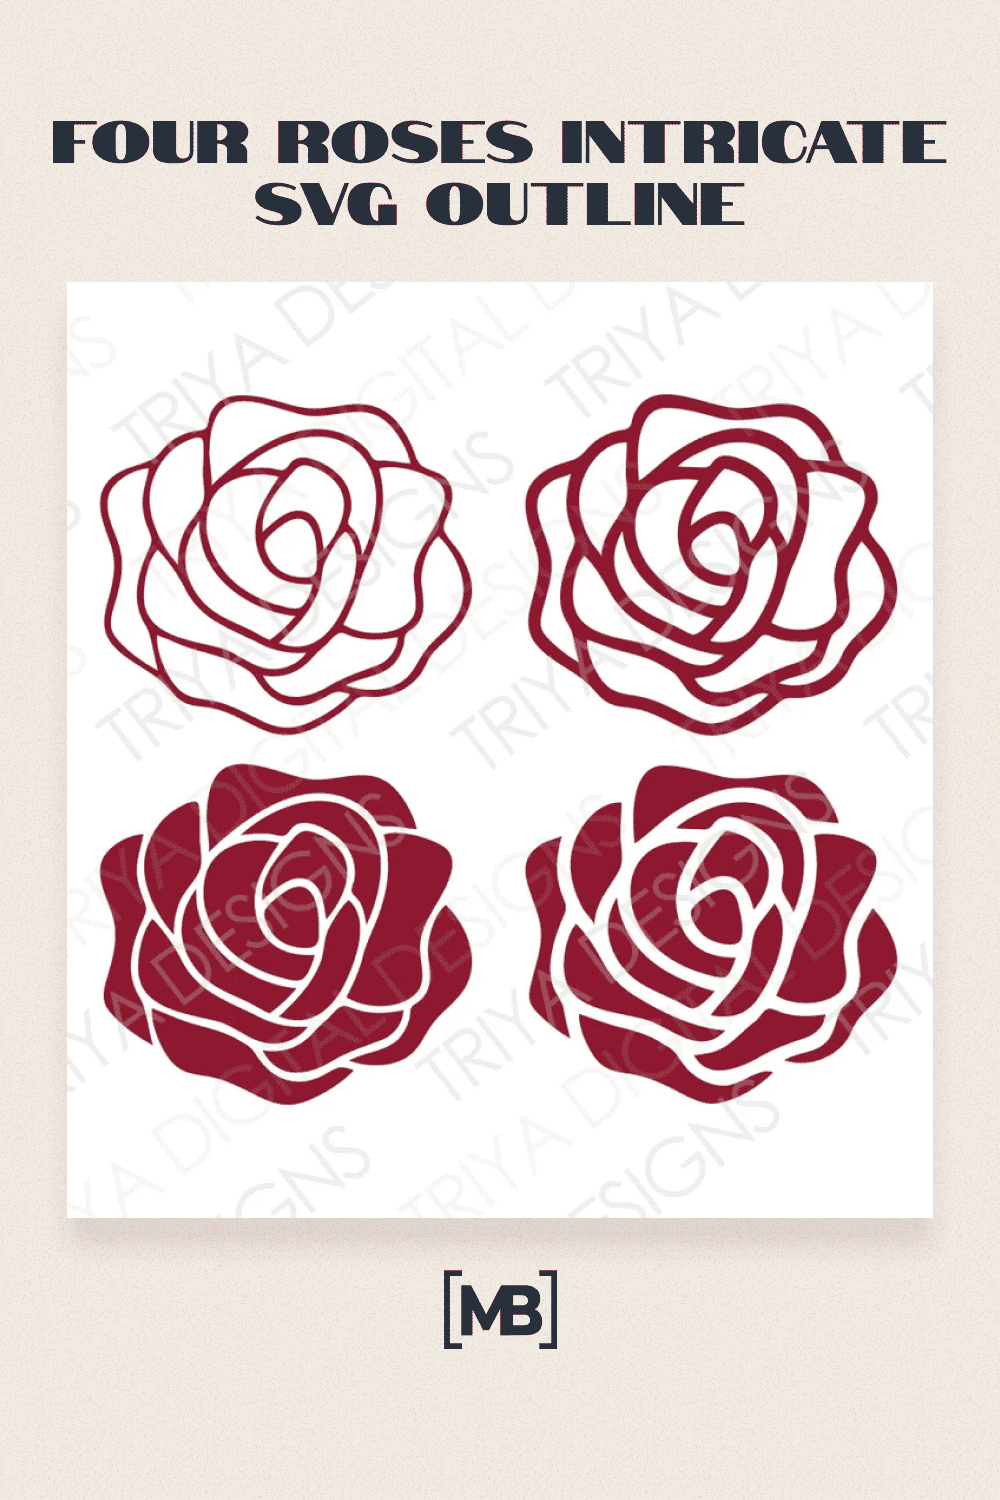 Four Roses Intricate SVG Outline.